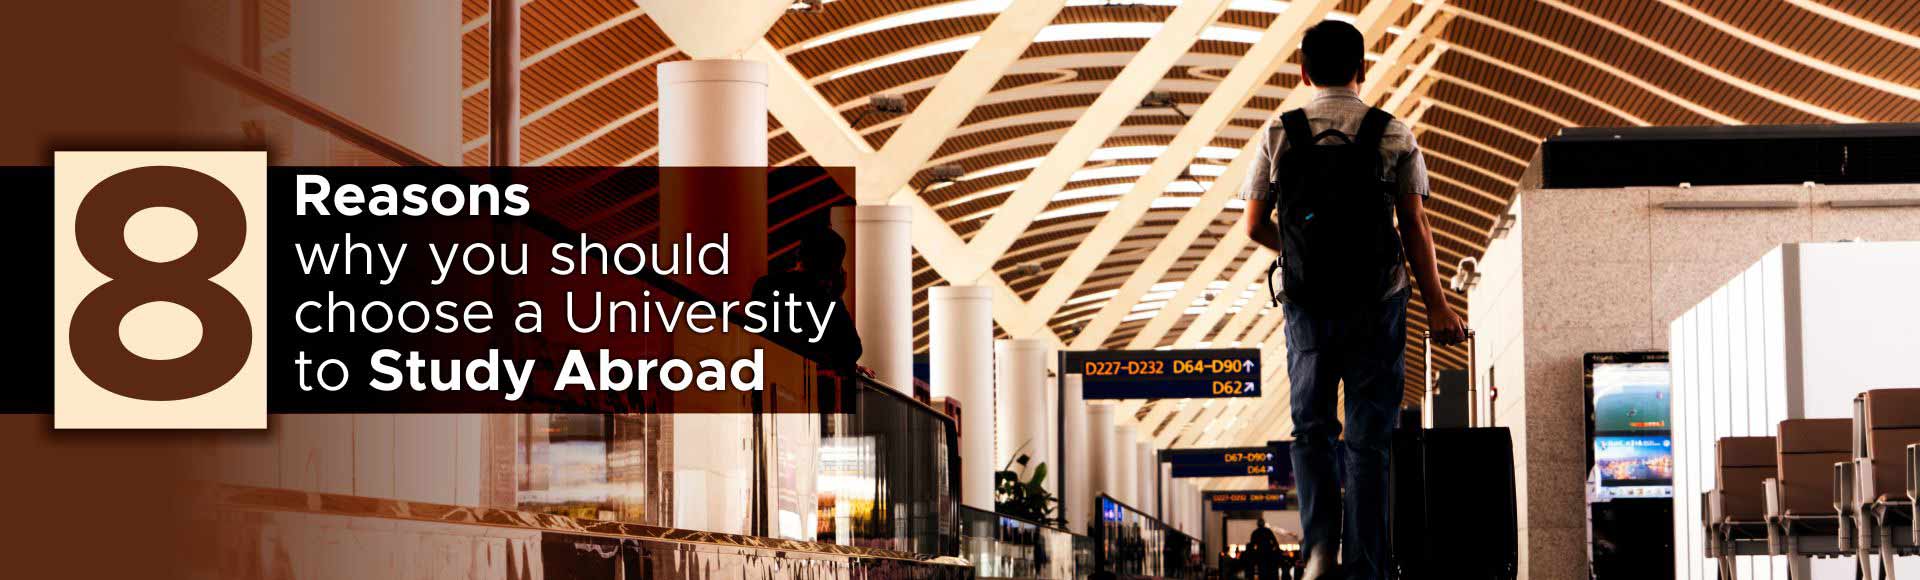 8 Reasons why you should choose a University to Study Abroad